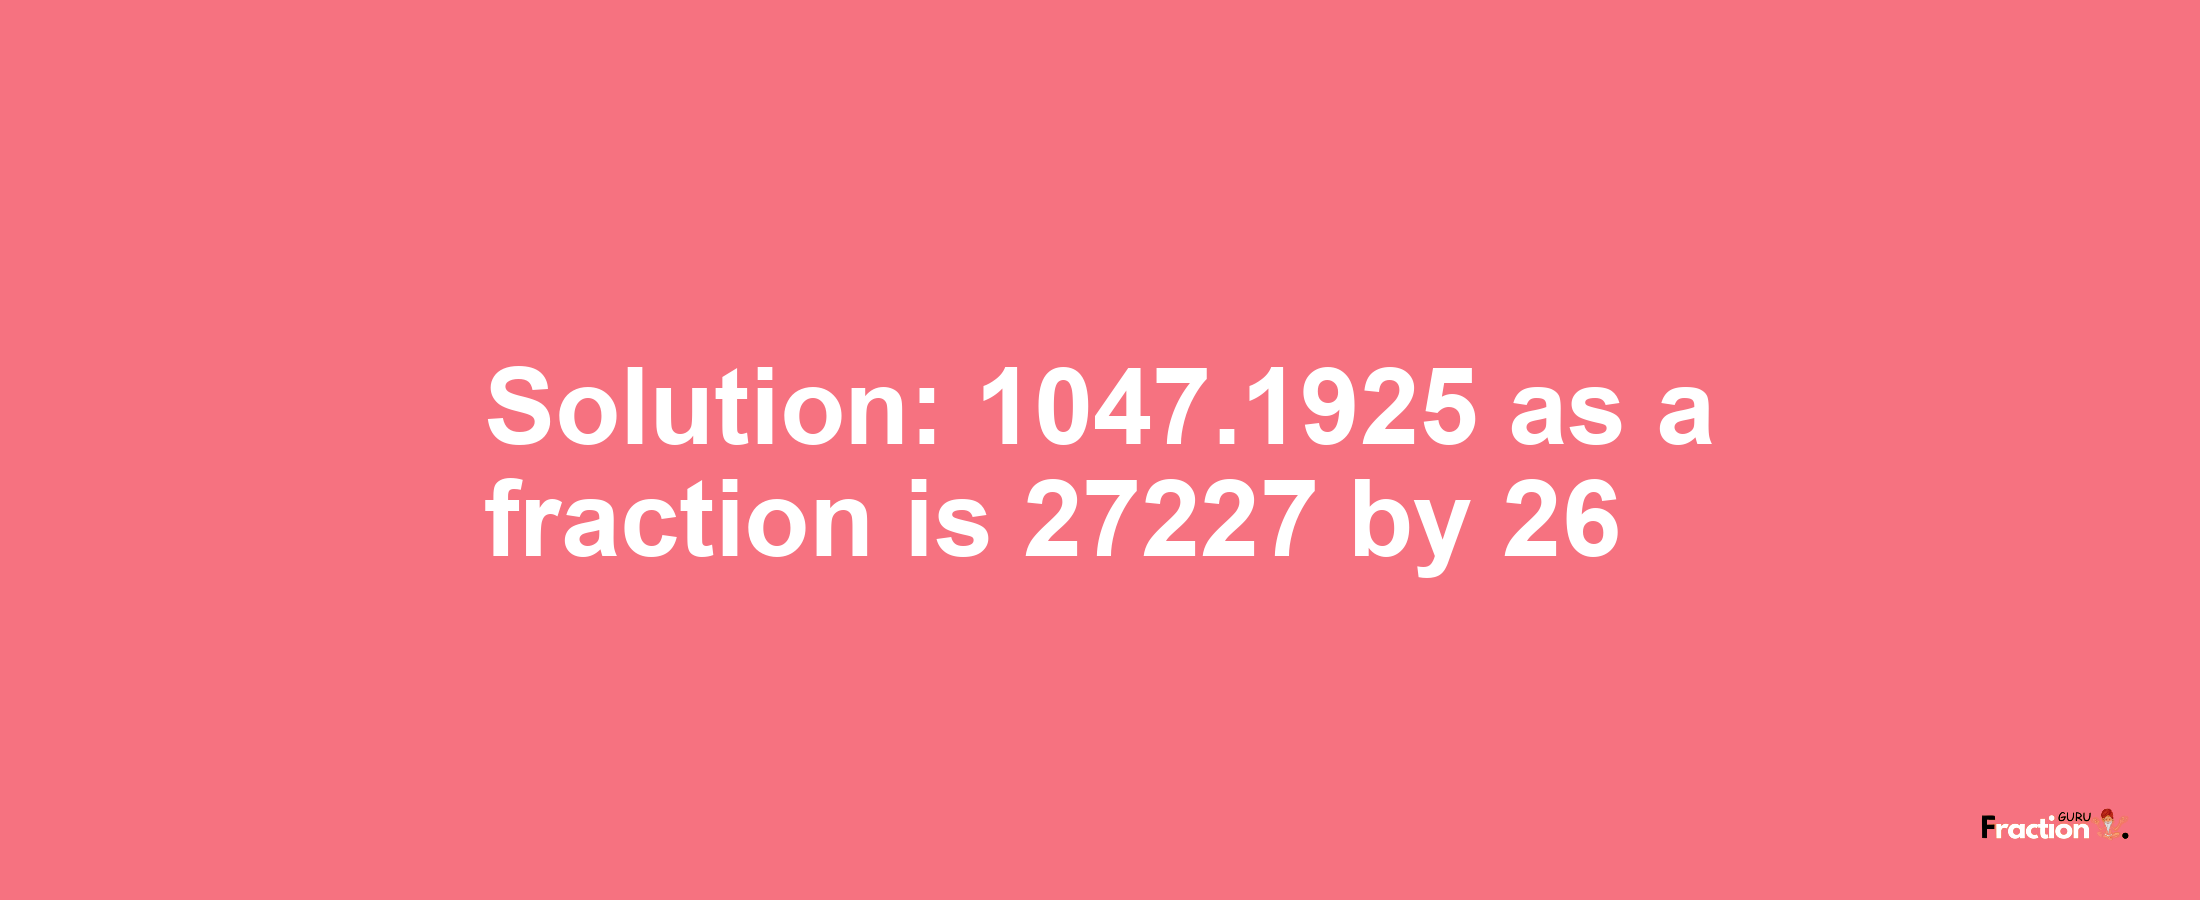 Solution:1047.1925 as a fraction is 27227/26